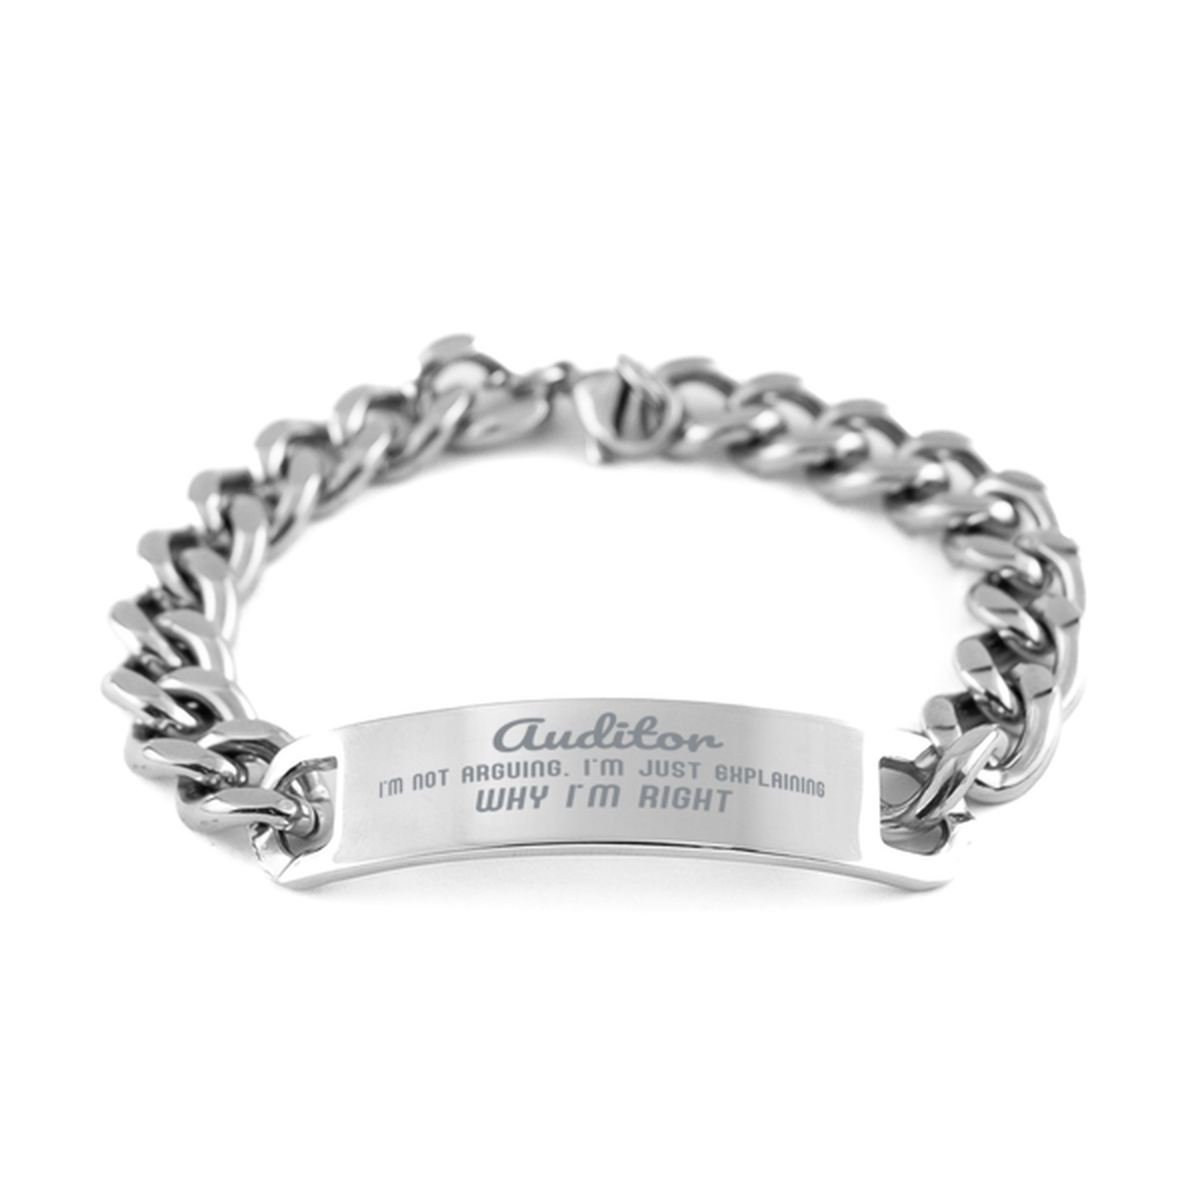 Auditor I'm not Arguing. I'm Just Explaining Why I'm RIGHT Cuban Chain Stainless Steel Bracelet, Graduation Birthday Christmas Auditor Gifts For Auditor Funny Saying Quote Present for Men Women Coworker